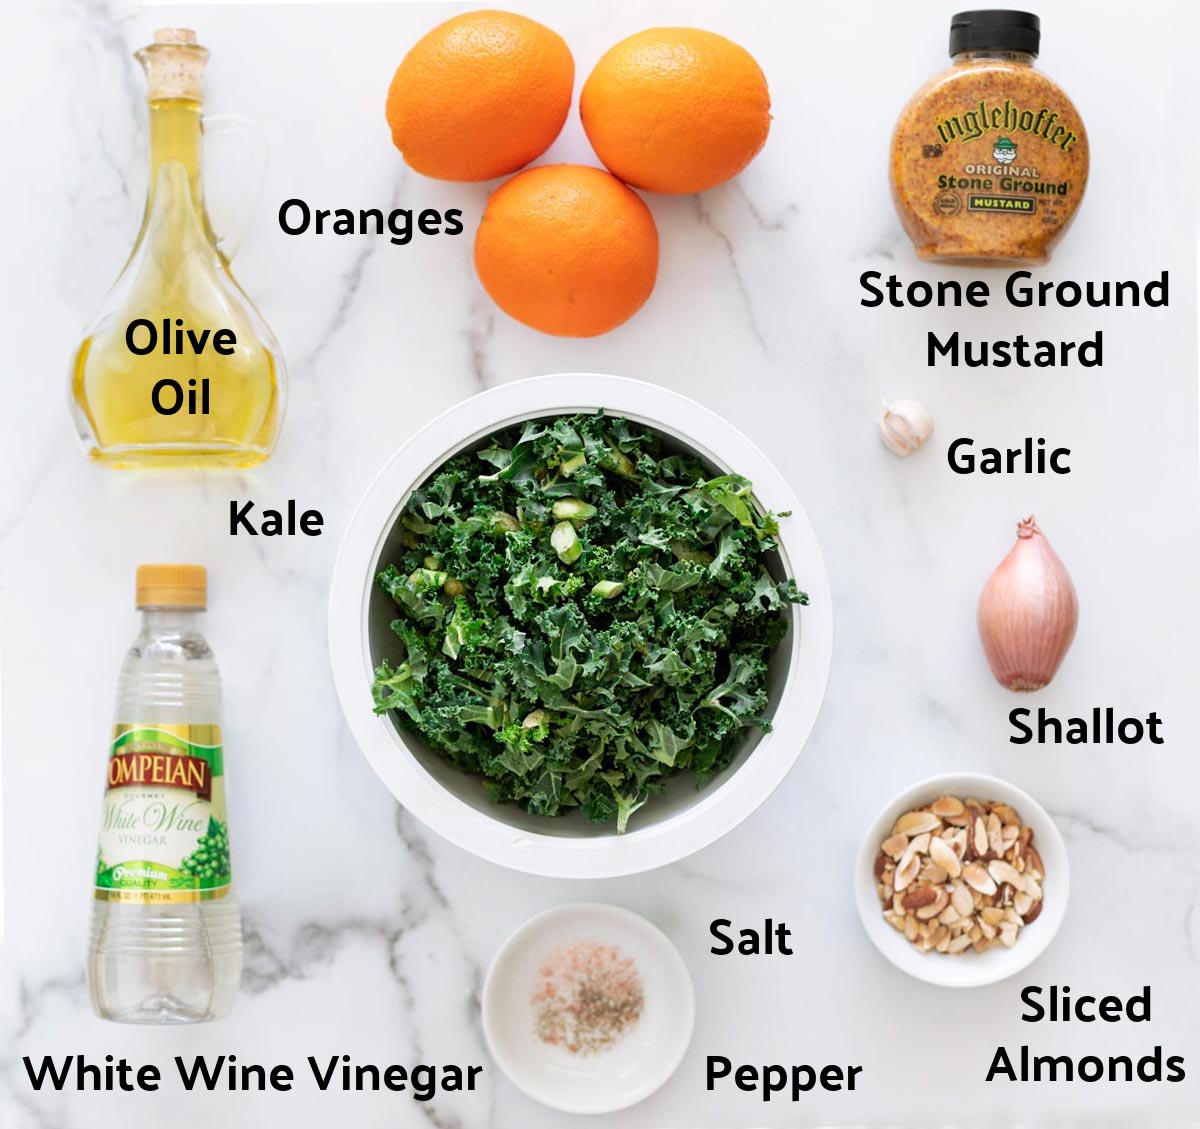 Ingredients to make a kale salad and vinaigrette dressing on a counter.